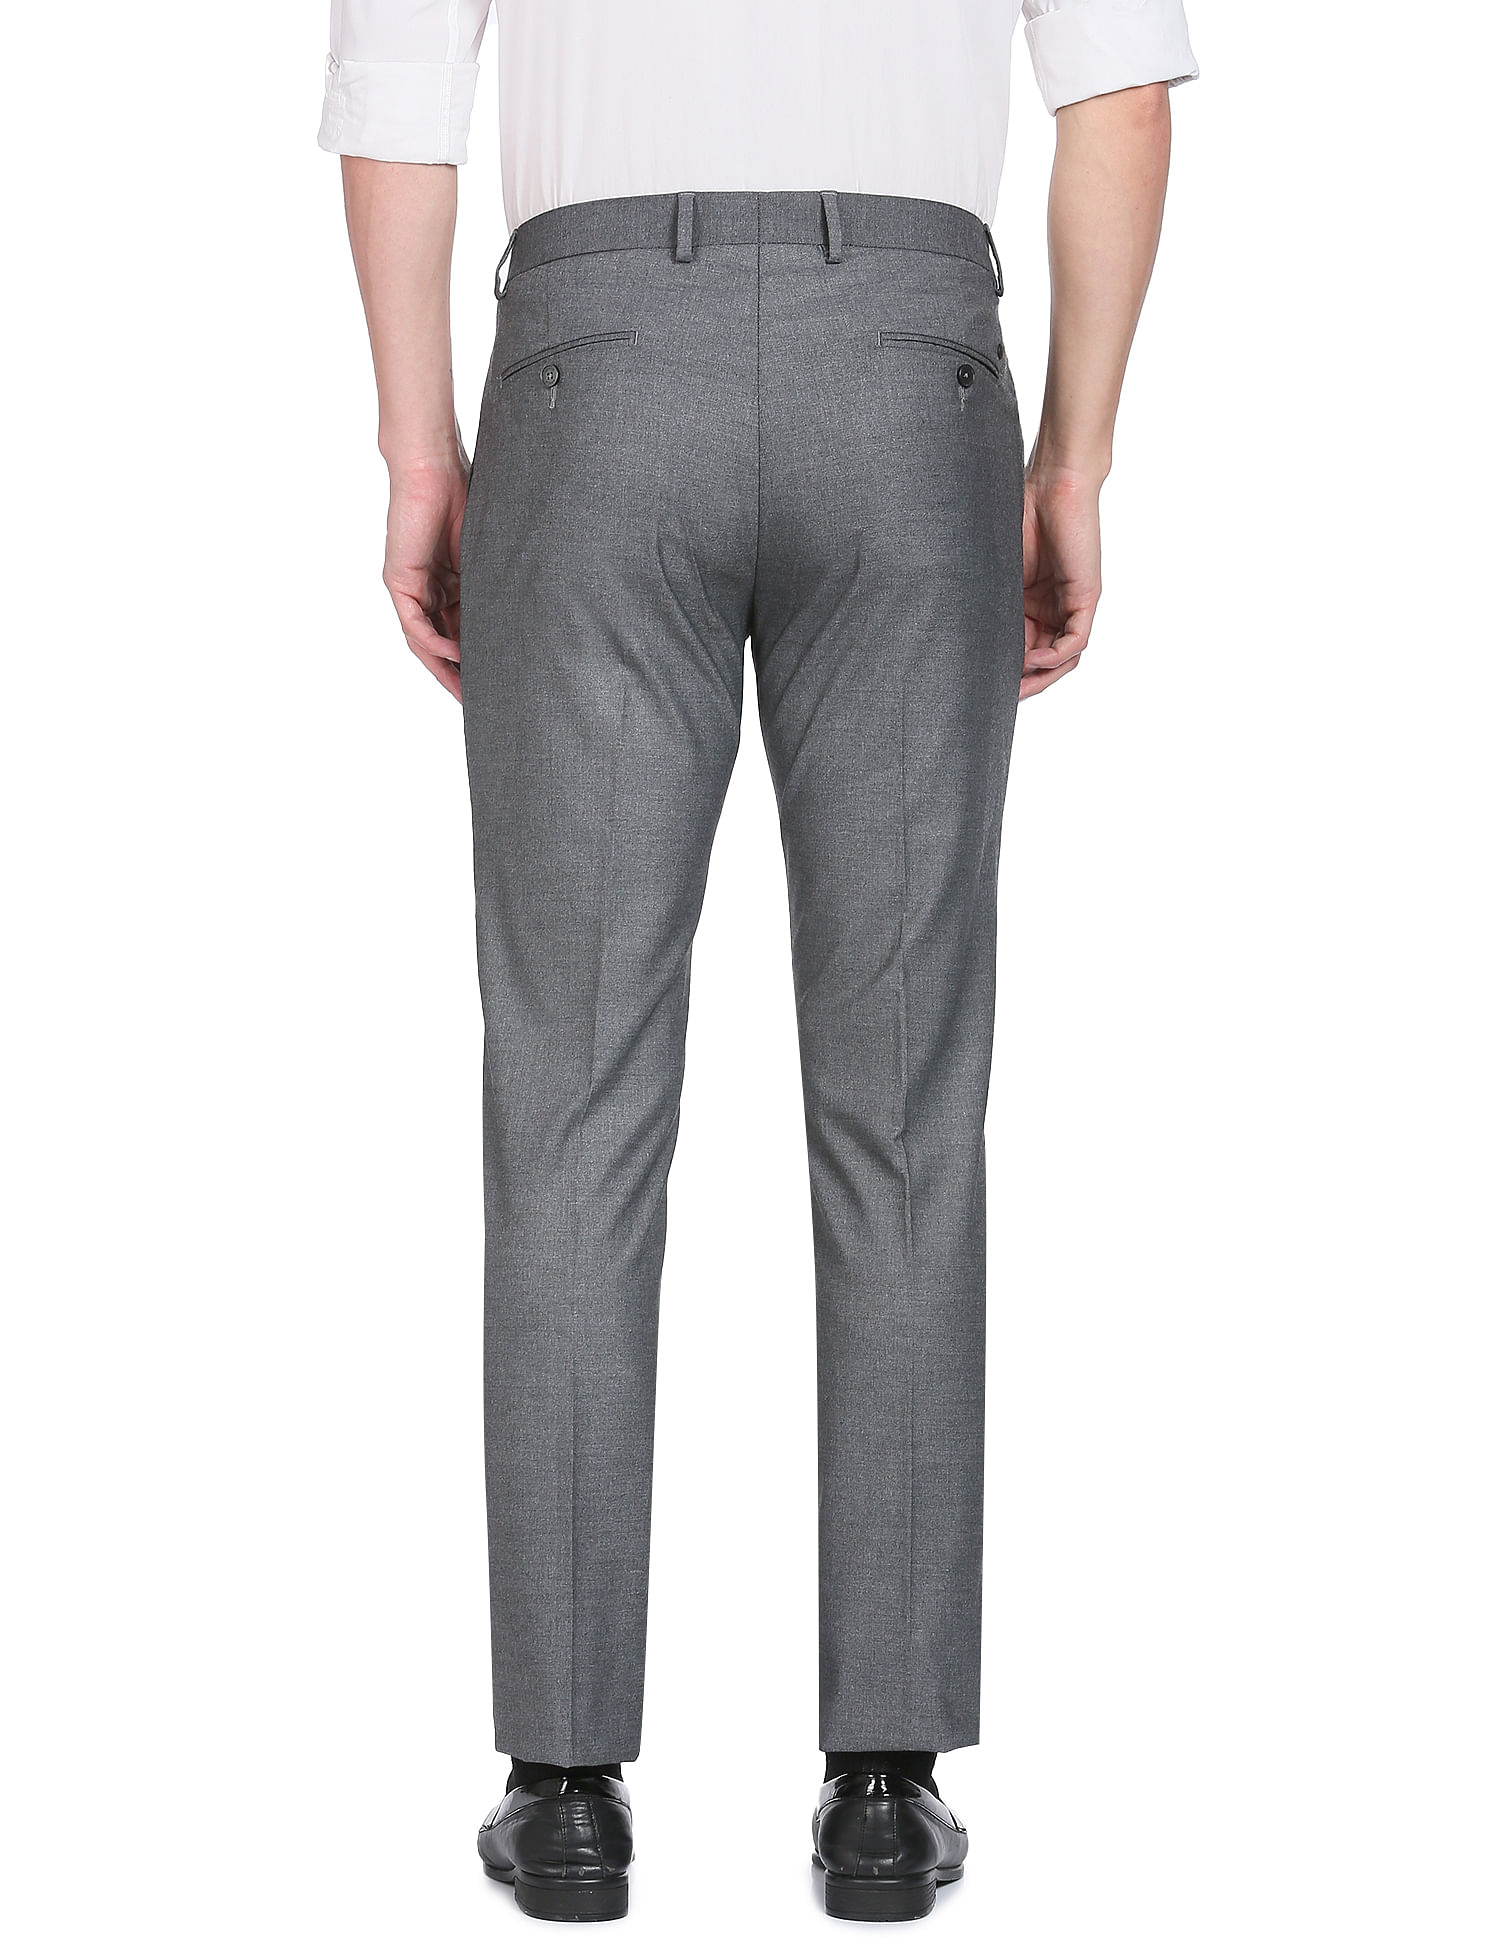 Buy Arrow Flat Front Regular Fit Solid Formal Trousers - NNNOW.com